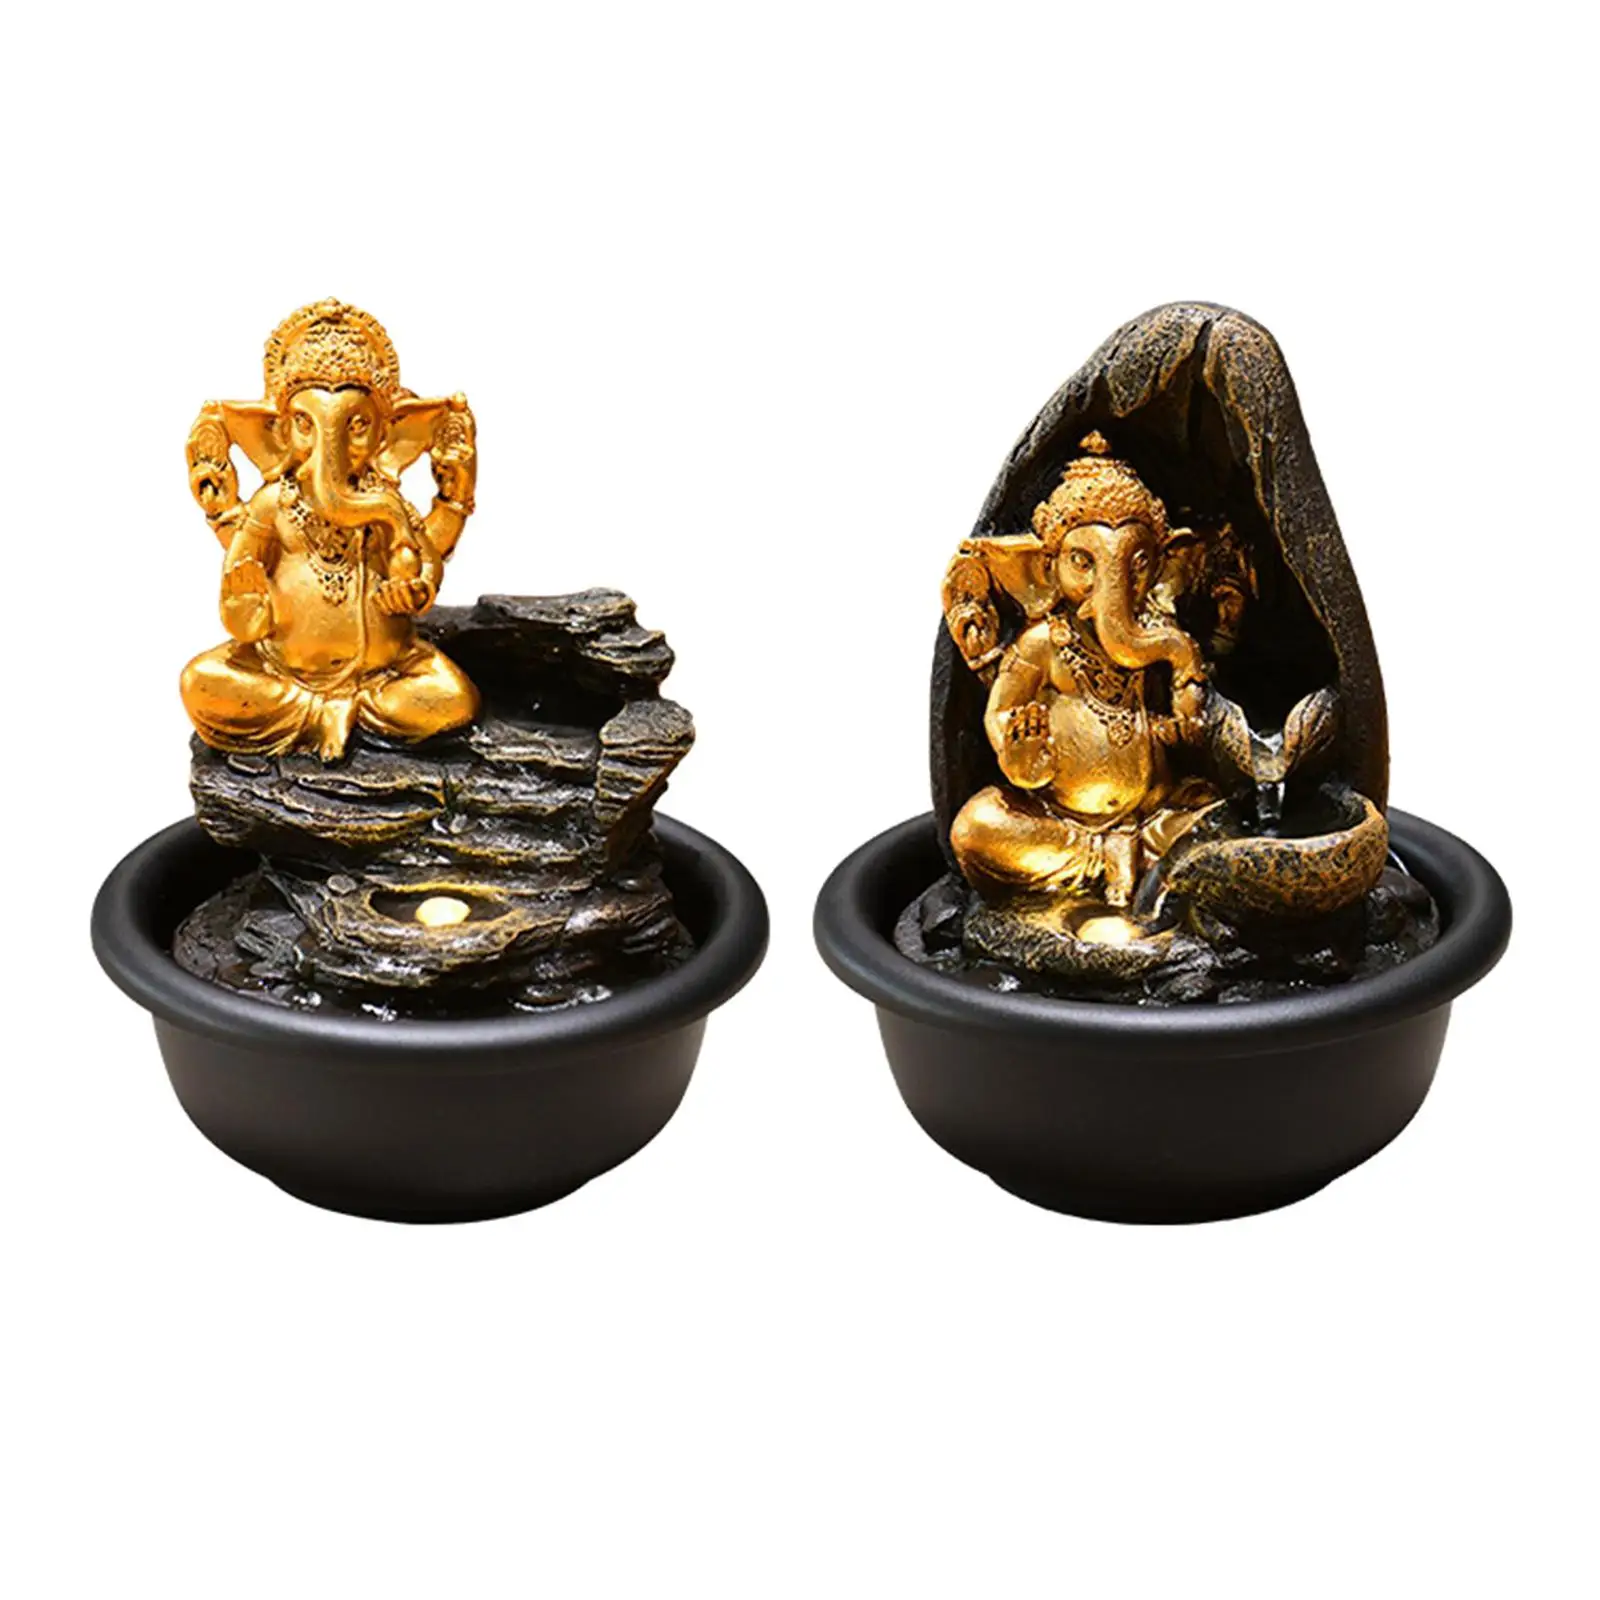 

Ganesha Statues Tabletop Water Fountain Gift Home Ornaments with LED Elephant Resin Statue Figurines Hindu God Lord for Bedroom